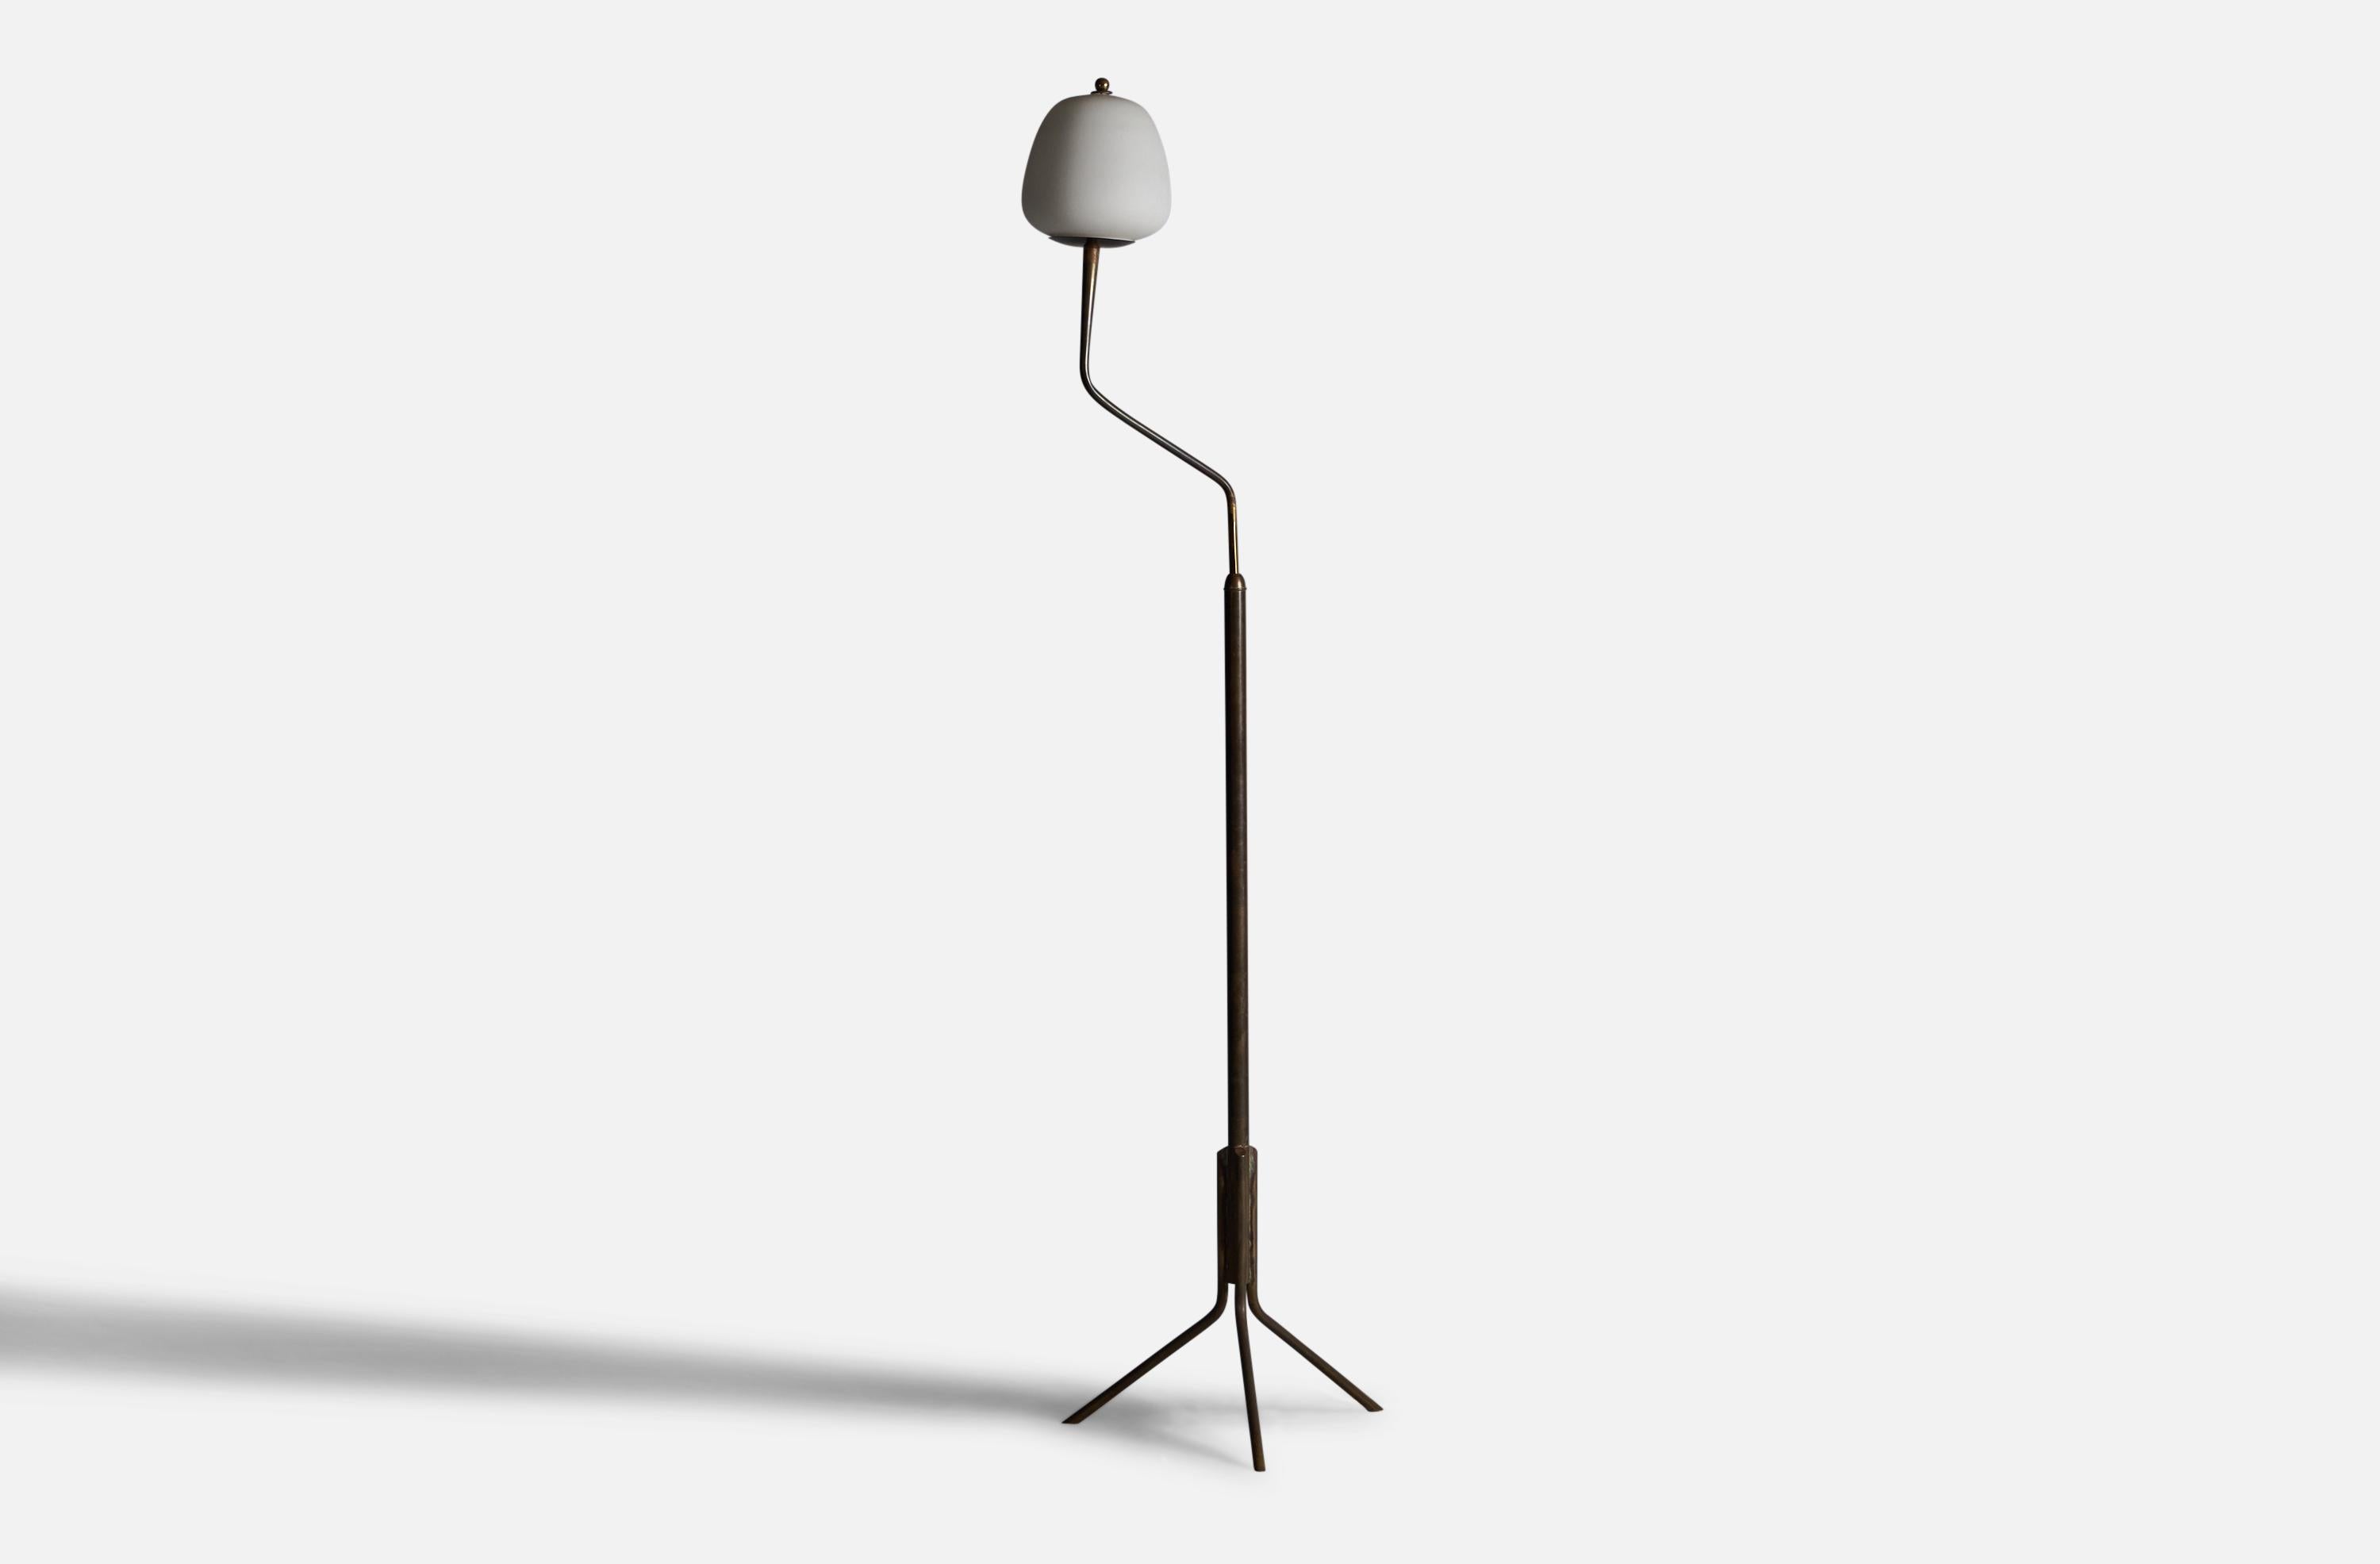 A brass and glass floor lamp, designed and produced in Italy, c. 1950s.

Overall Dimensions: 72.5